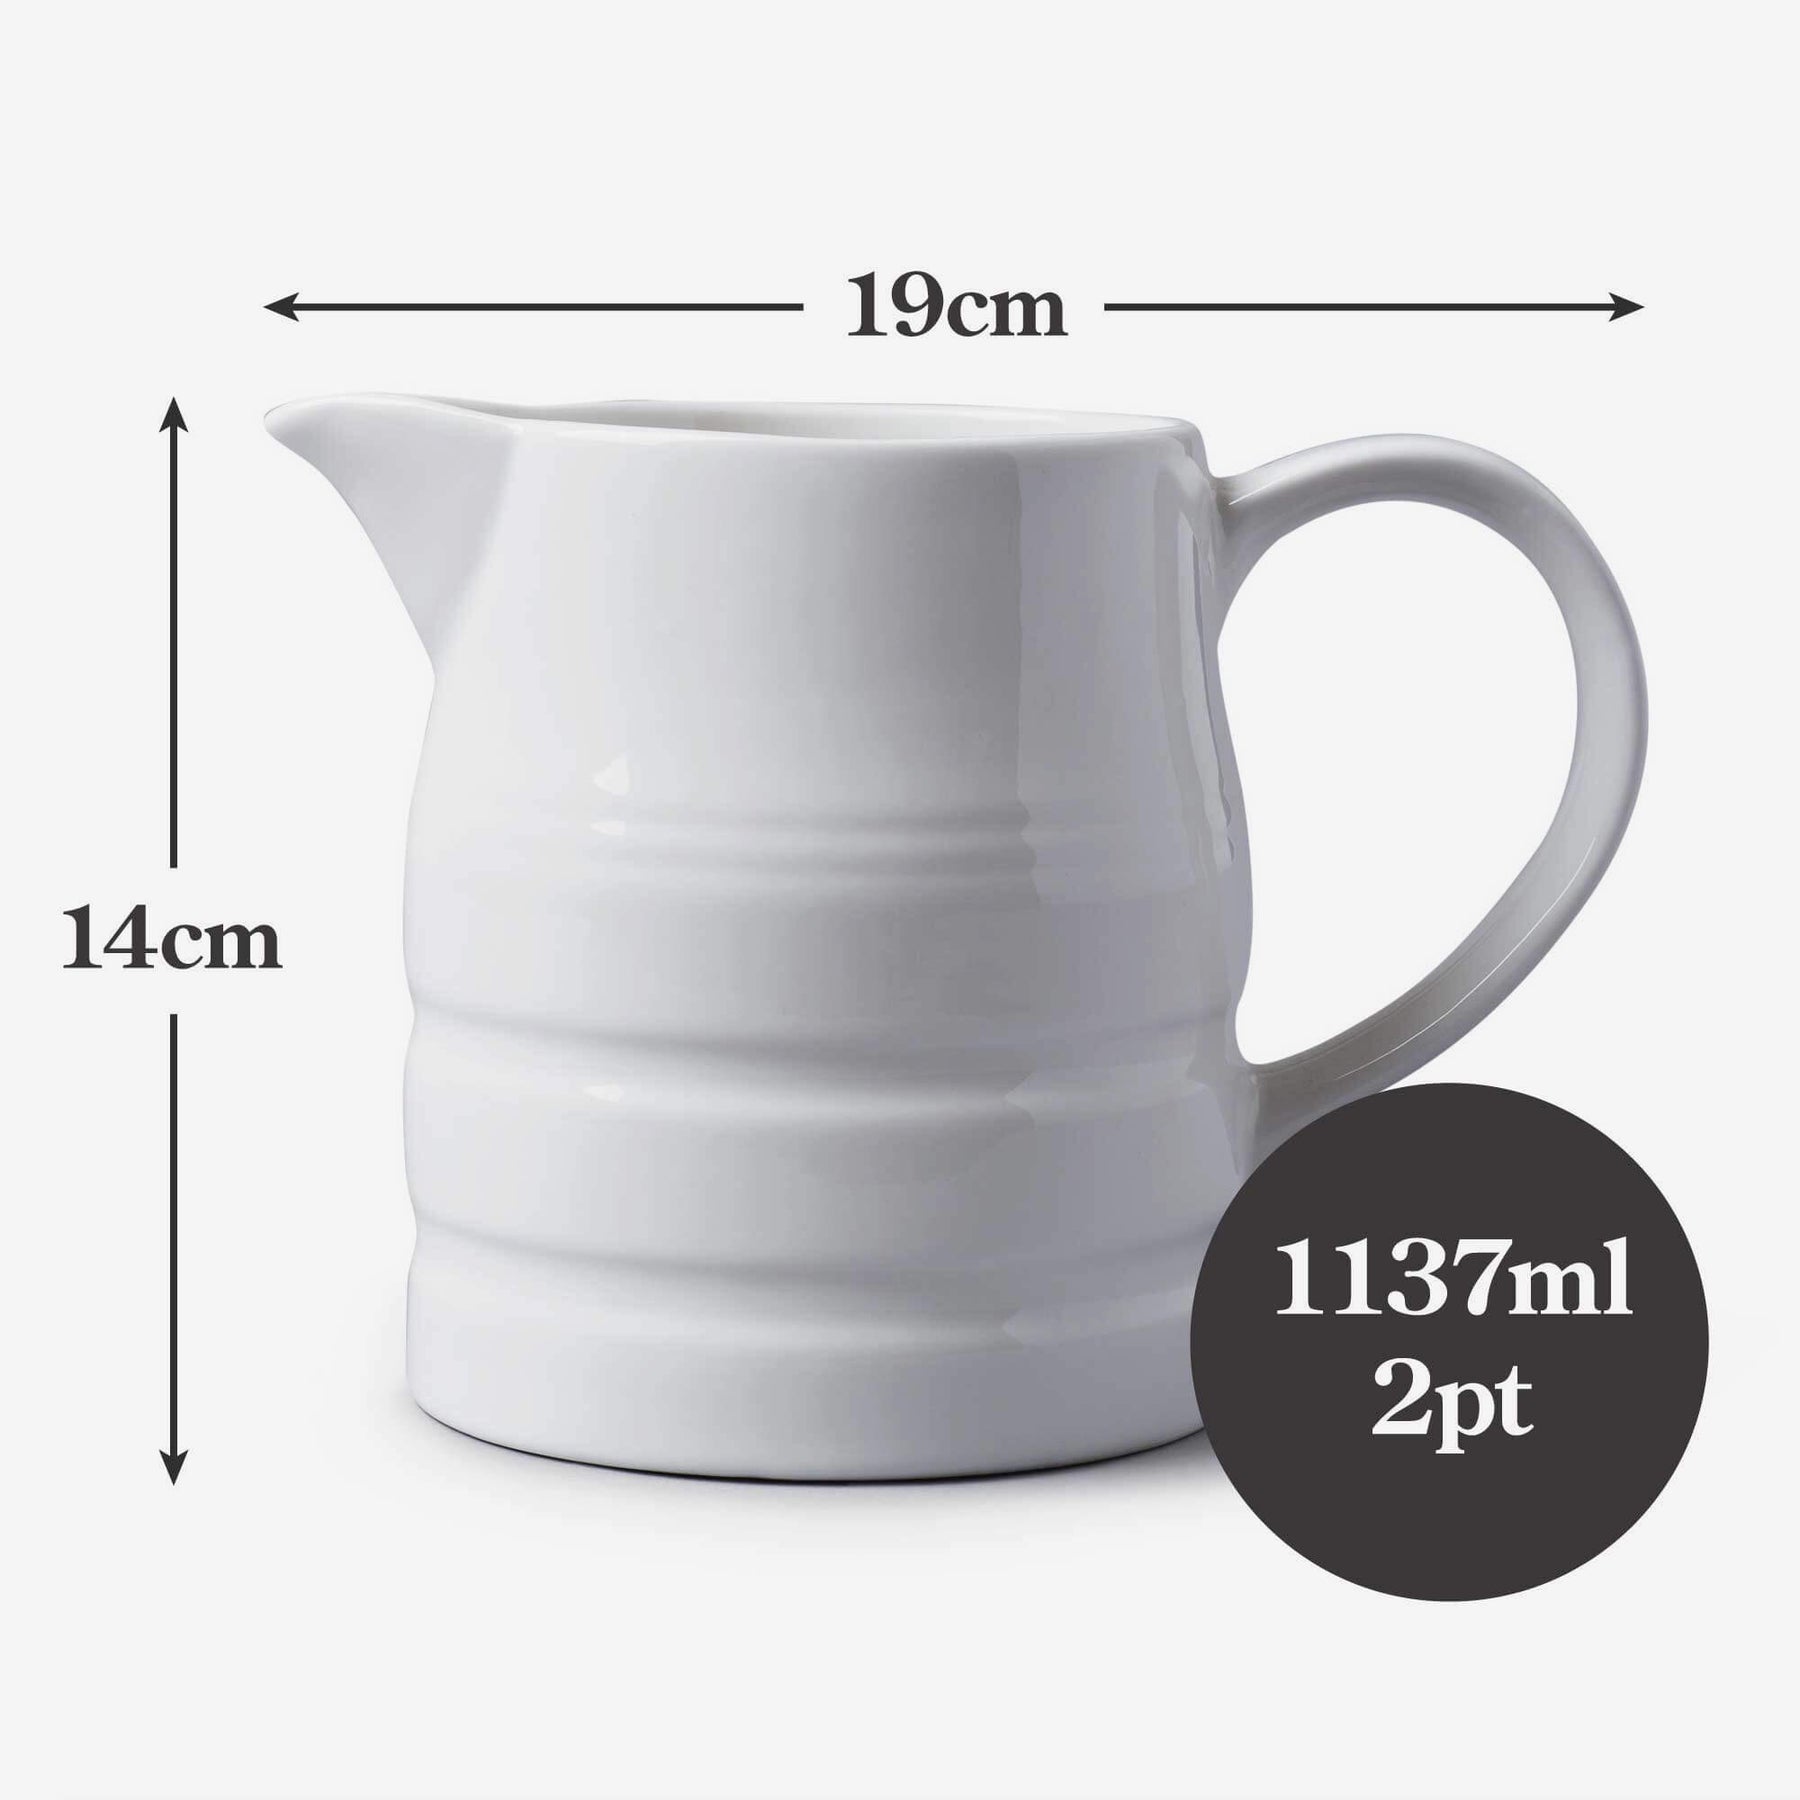 Porcelain Traditional Churn Jug, Available in 5 Sizes